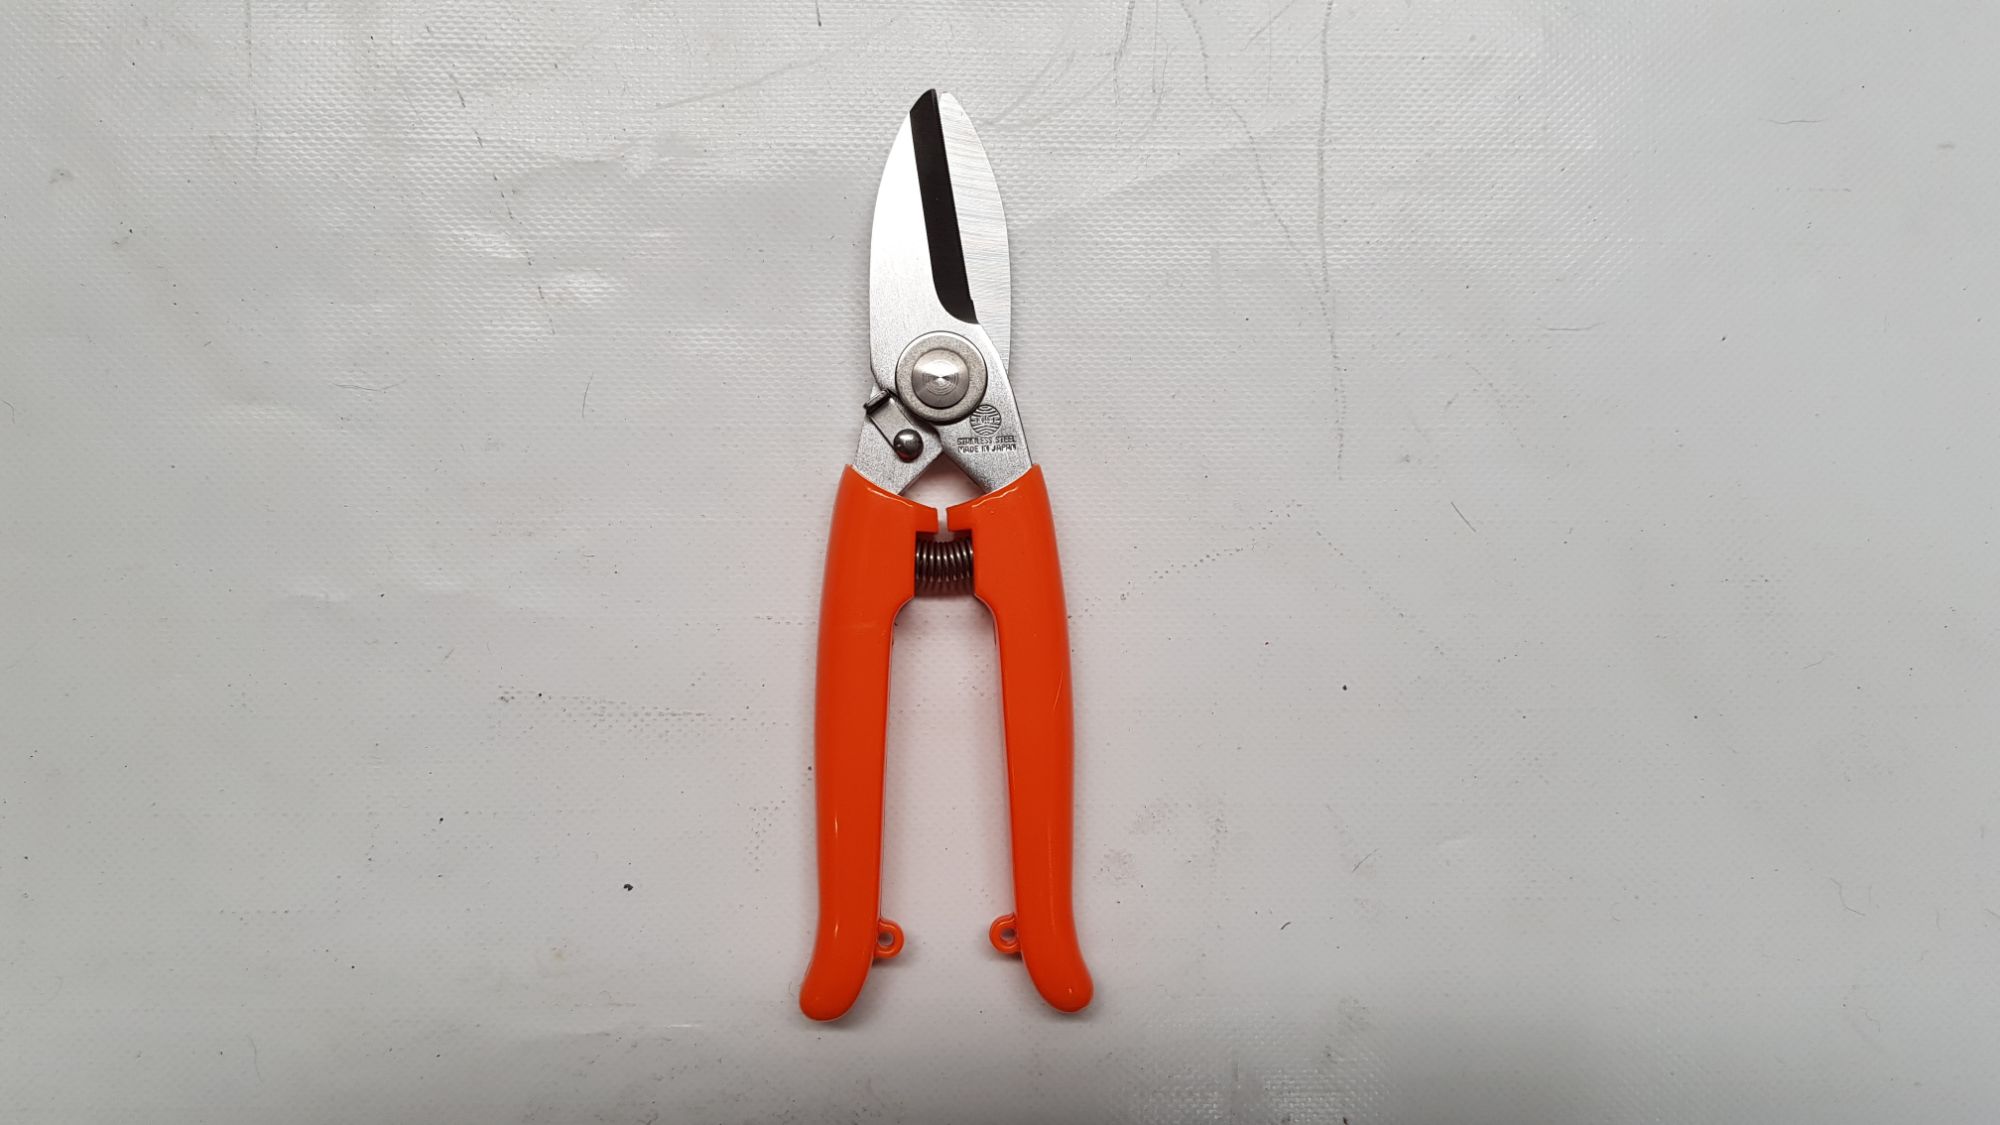 Japanese Stainless Steel Fishing Cutters For Sale in Perth, Western Australia